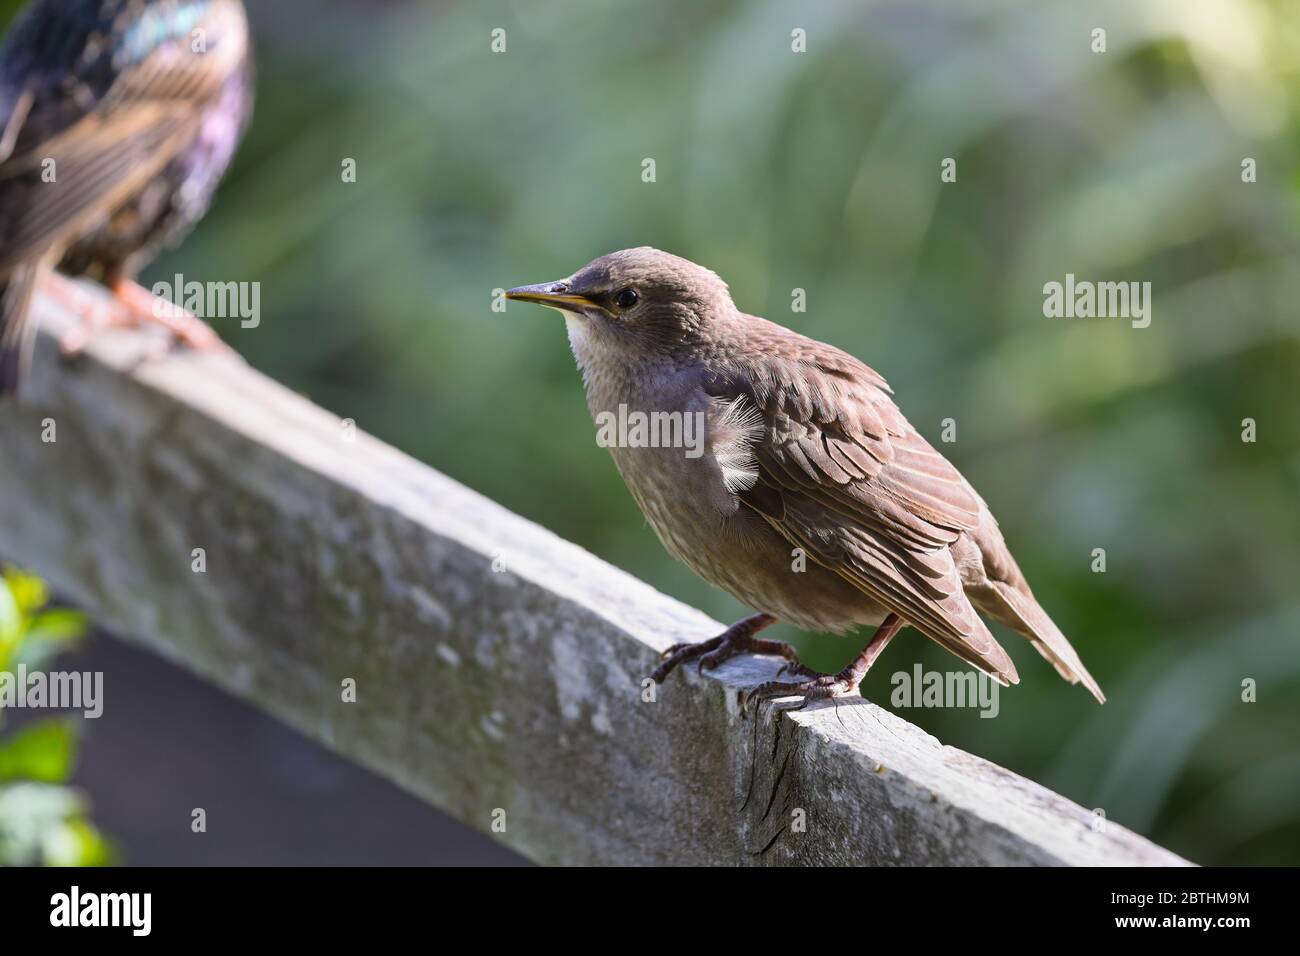 Starling Fledgling (Sturnus Vulgaris) Perched on a Garden Fence Illuminated by Late Afternoon Light, UK Stock Photo